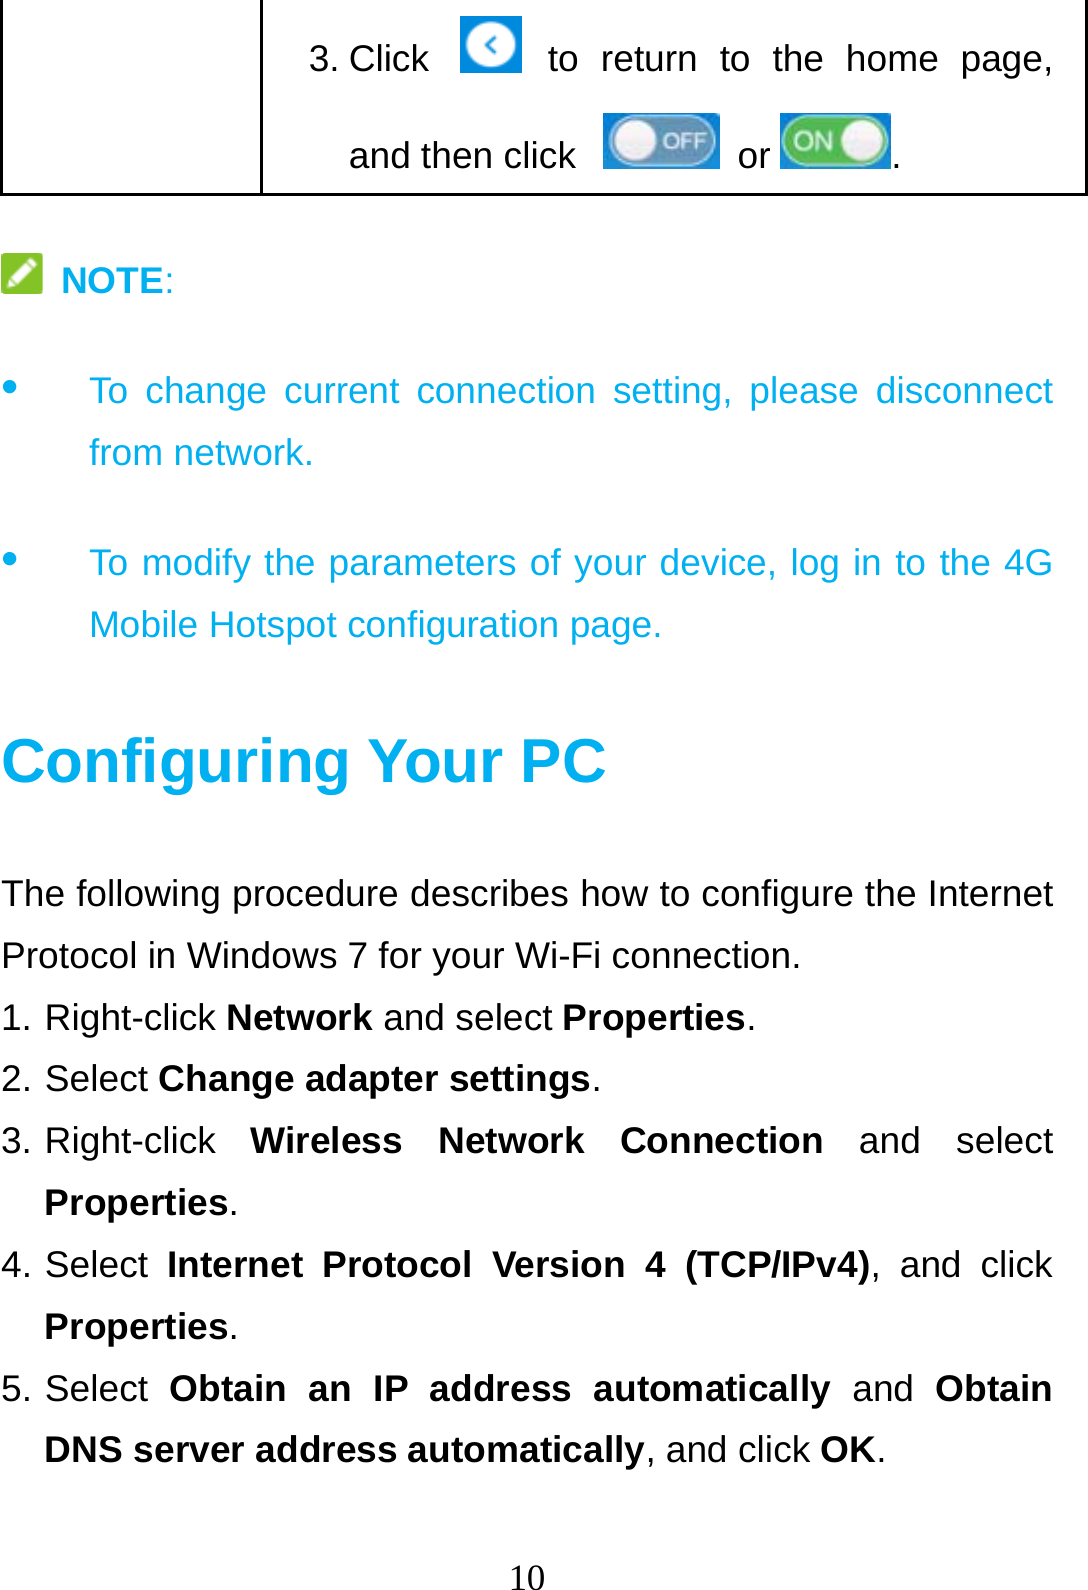 10  3. Click   to return to the home page, and then click    or .  NOTE: •  To change current connection setting, please disconnect from network. •  To modify the parameters of your device, log in to the 4G Mobile Hotspot configuration page.  Configuring Your PC The following procedure describes how to configure the Internet Protocol in Windows 7 for your Wi-Fi connection. 1. Right-click Network and select Properties. 2. Select Change adapter settings. 3. Right-click  Wireless Network Connection and select Properties.  4. Select  Internet Protocol Version 4 (TCP/IPv4), and click Properties. 5. Select  Obtain an IP address automatically and Obtain DNS server address automatically, and click OK.  